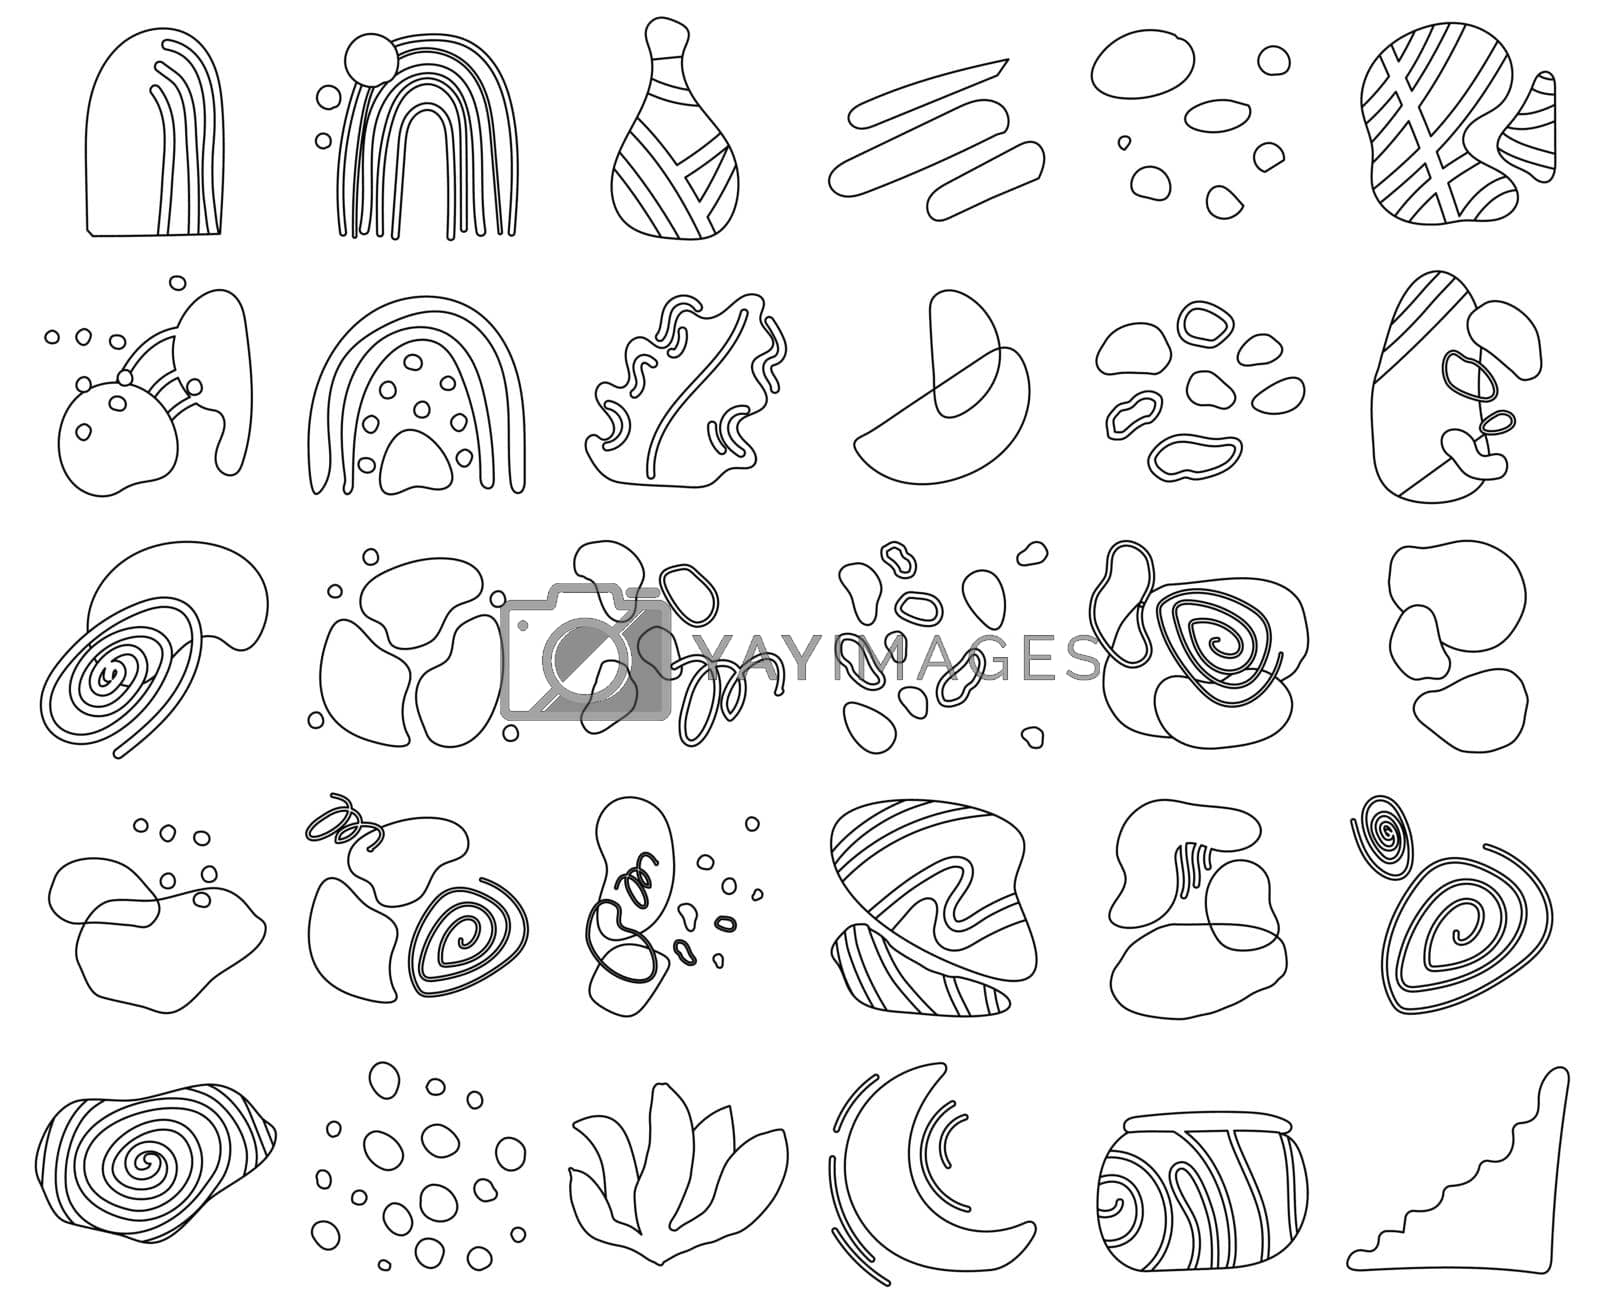 Royalty free image of Bohemian abstract shape element in line art style by valueinvestor